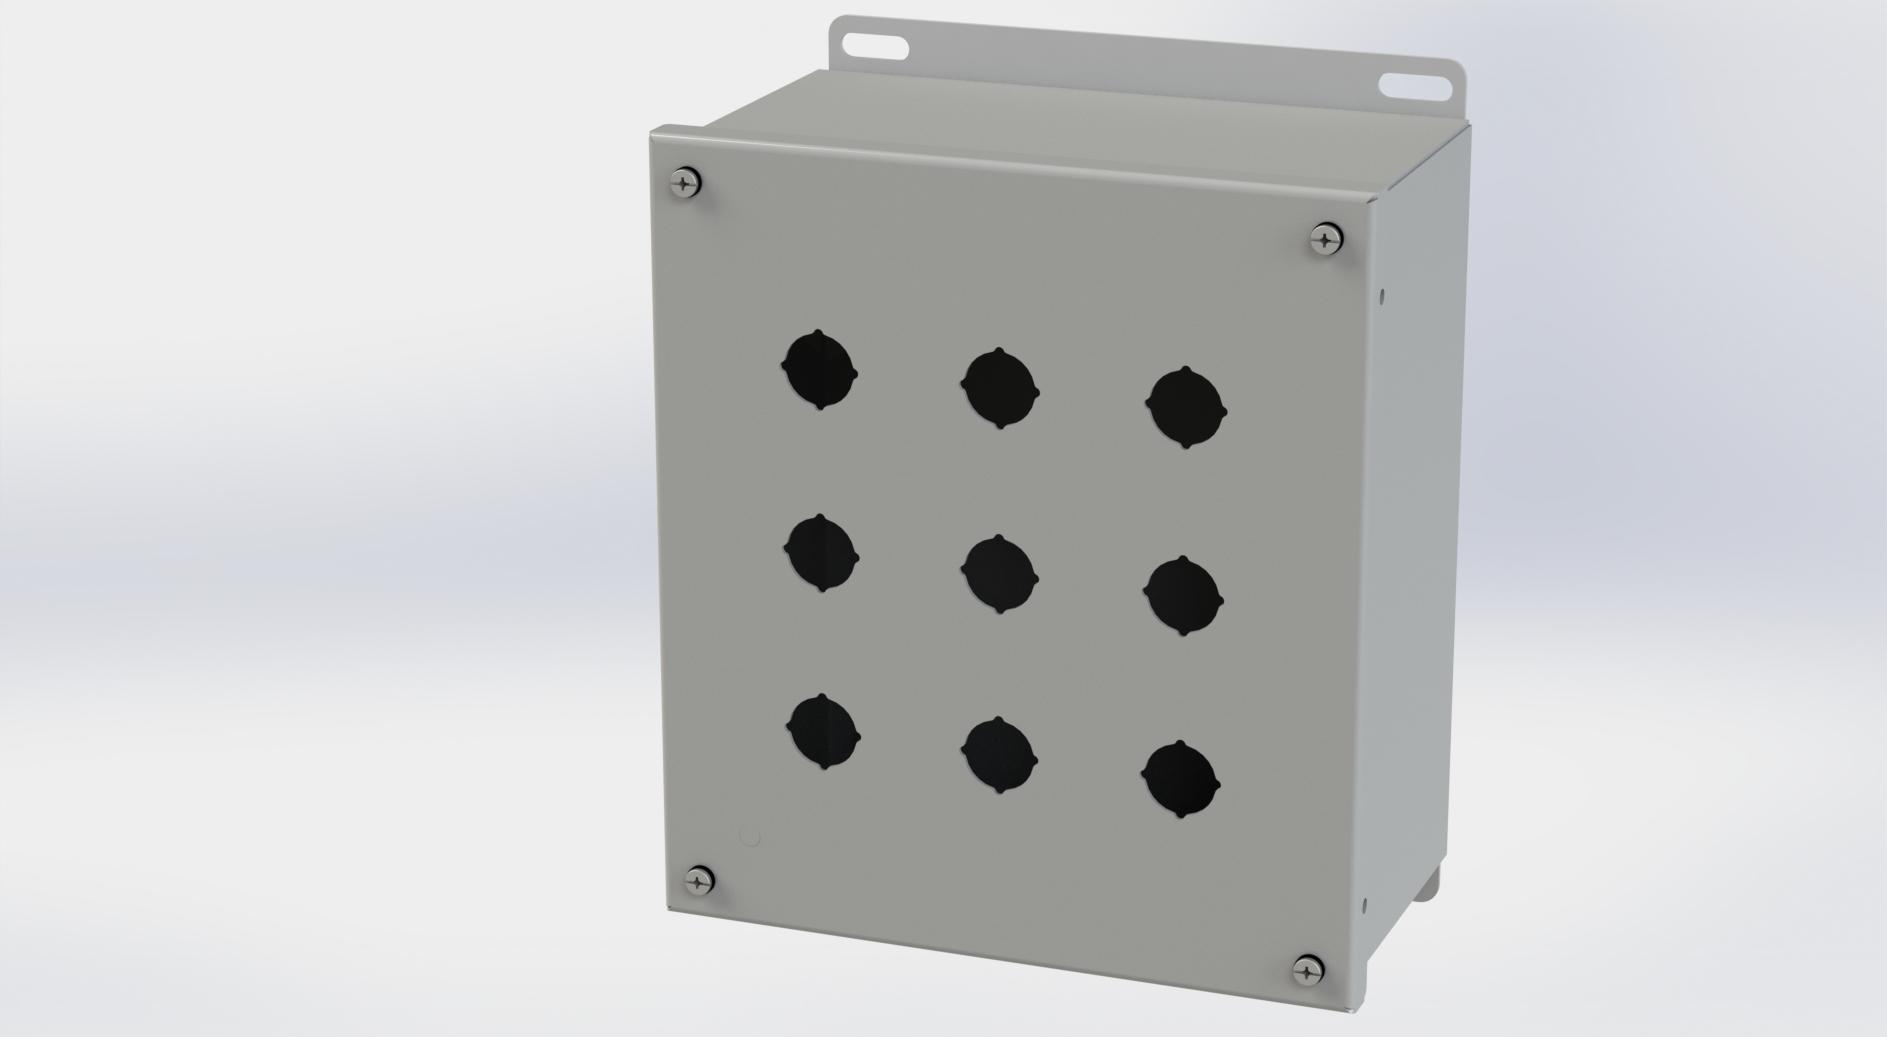 Saginaw Control SCE-9PBXI PBXI Enclosure, Height:9.50", Width:8.50", Depth:4.75", ANSI-61 gray powder coating inside and out.